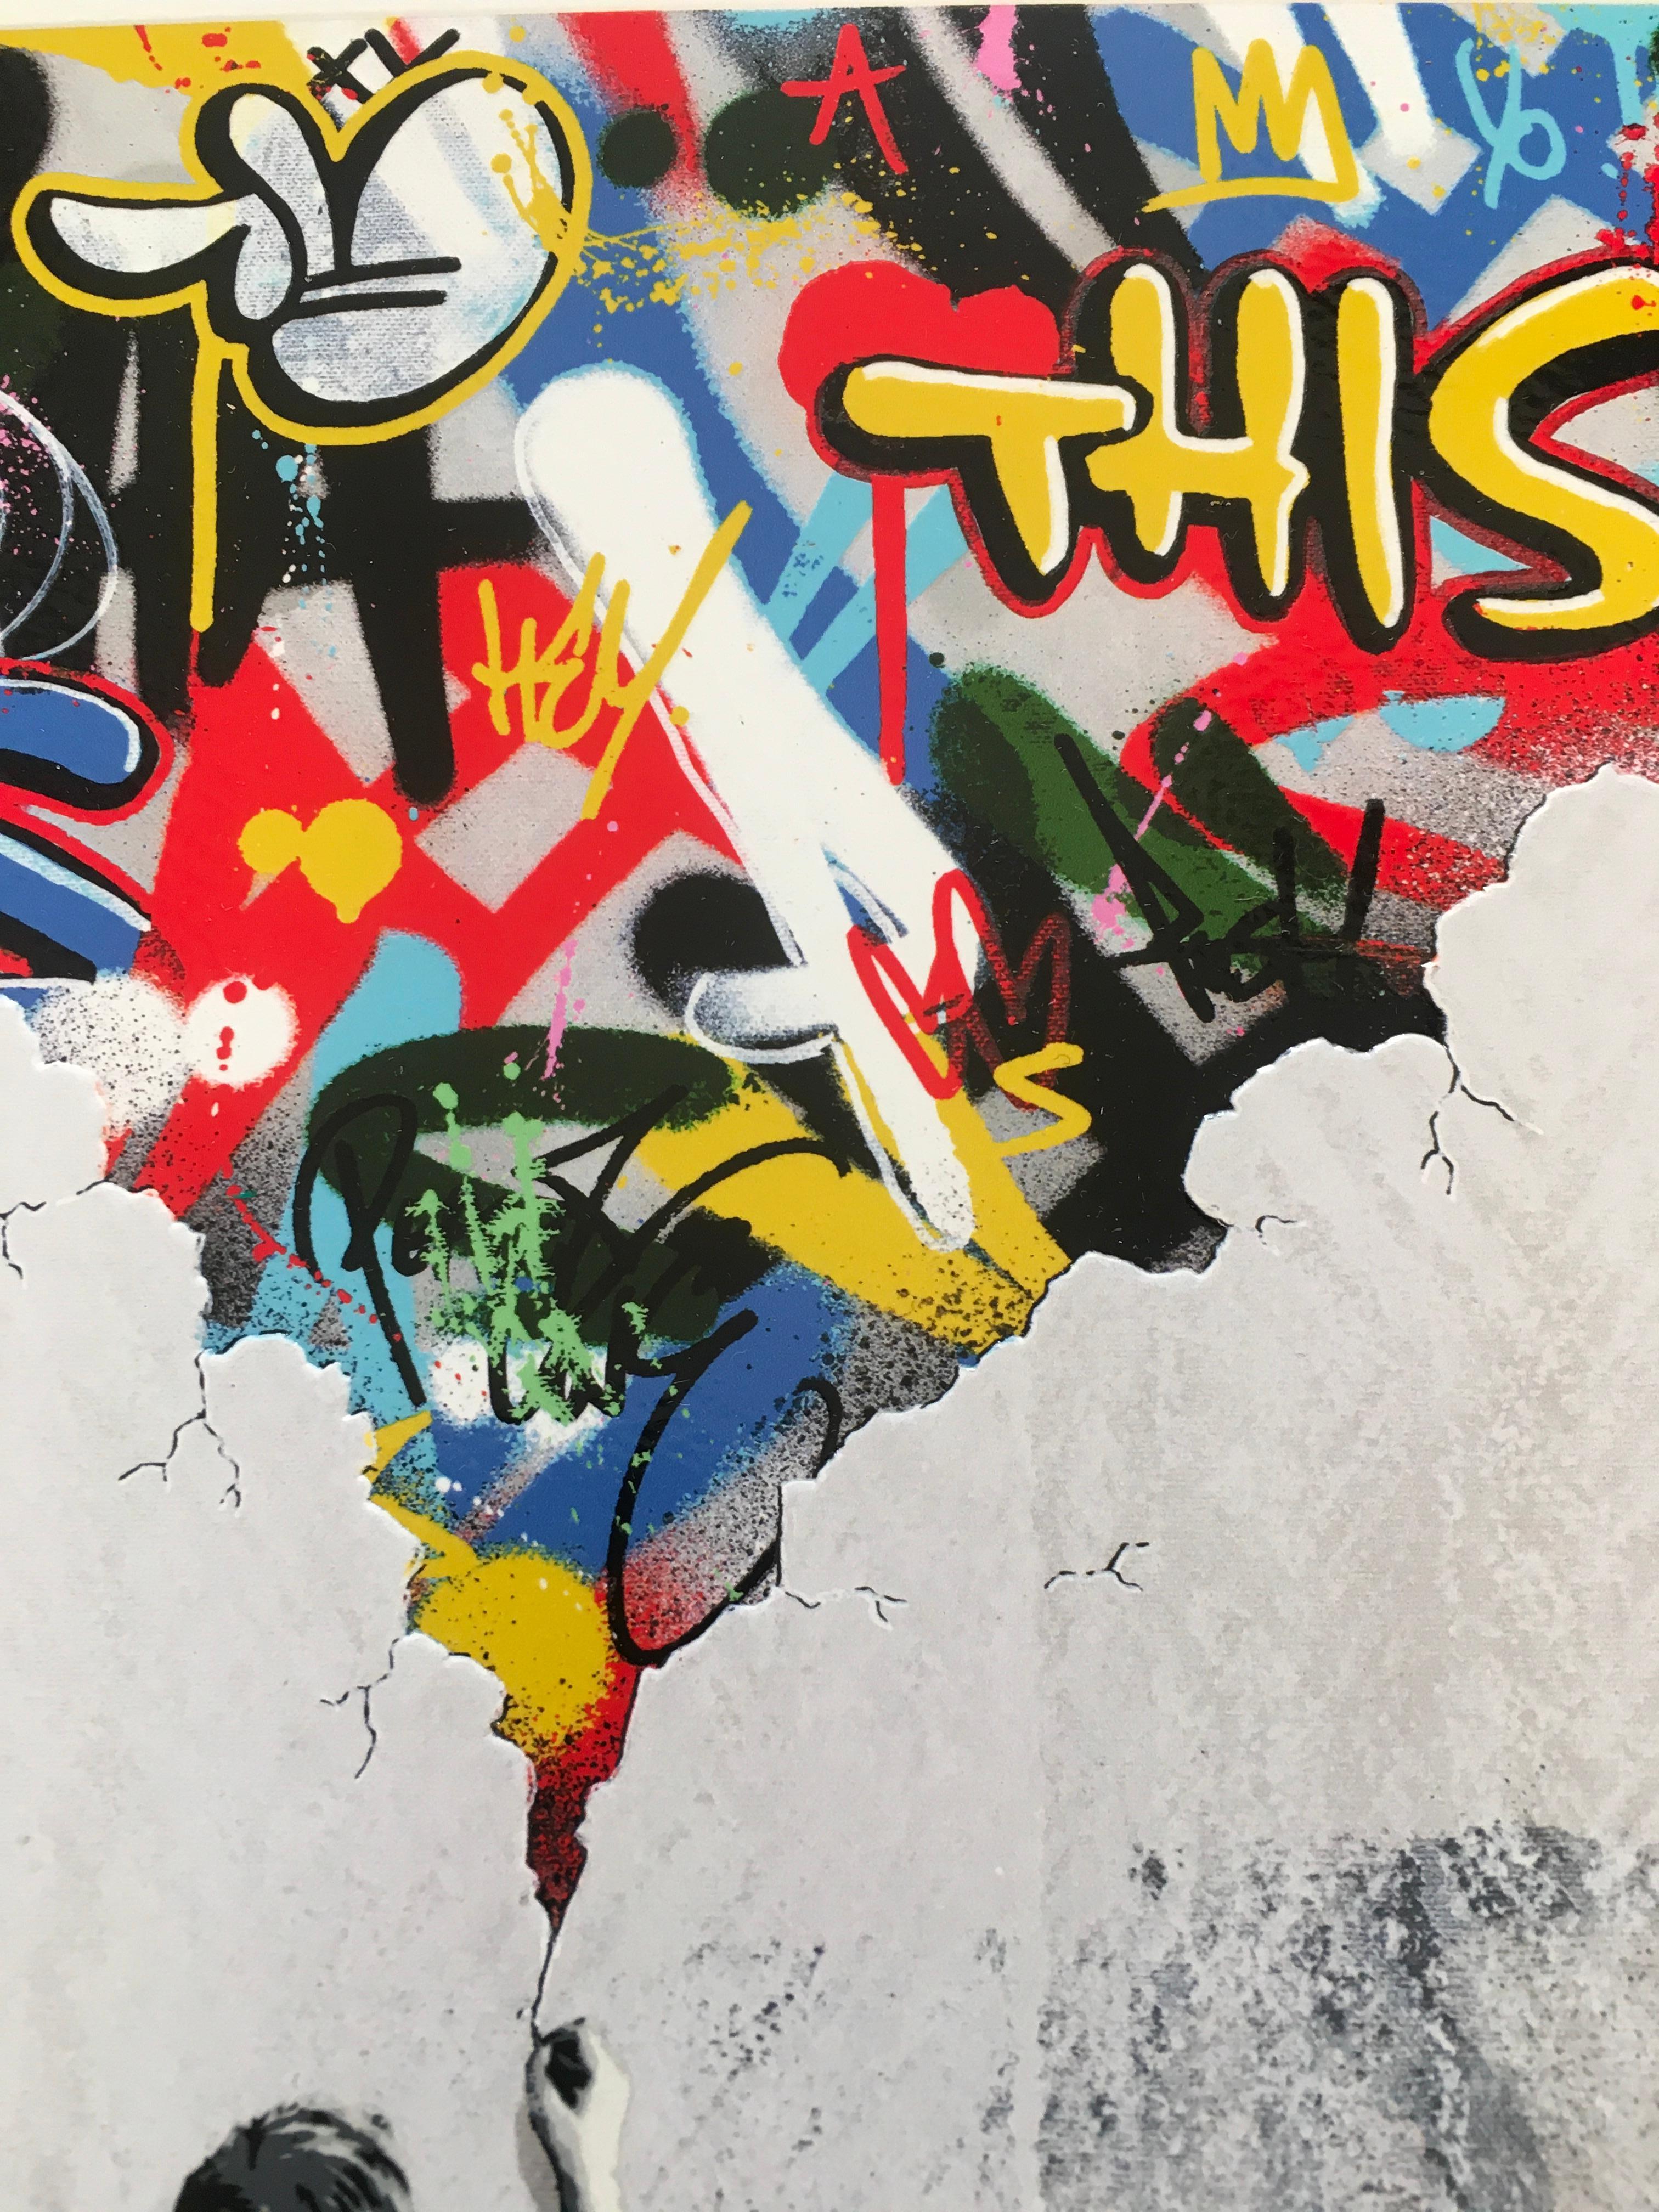 „The Crack“ by Martin Whatson, 2021
Giclee Print with 7 Colour Screen Print on 300 Gsm Somerset Satin Paper. The paper is embossed around the crack for a 3D effect with the graffiti in the background.
50 x 25 cm / 19,7 x 9,8 inches (H x W)
12 hour